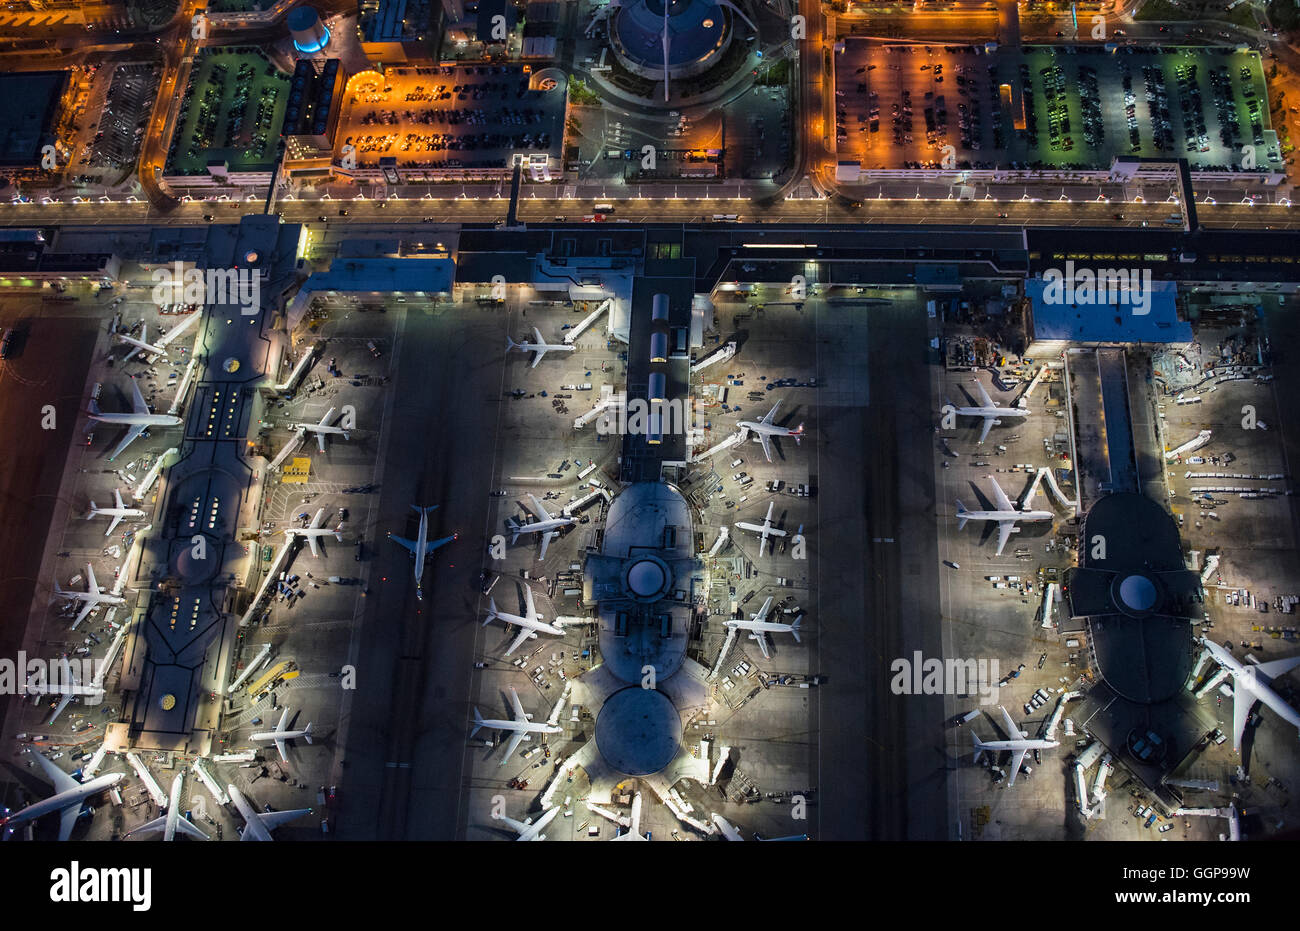 Aerial view of airplanes parked in airport gates Stock Photo